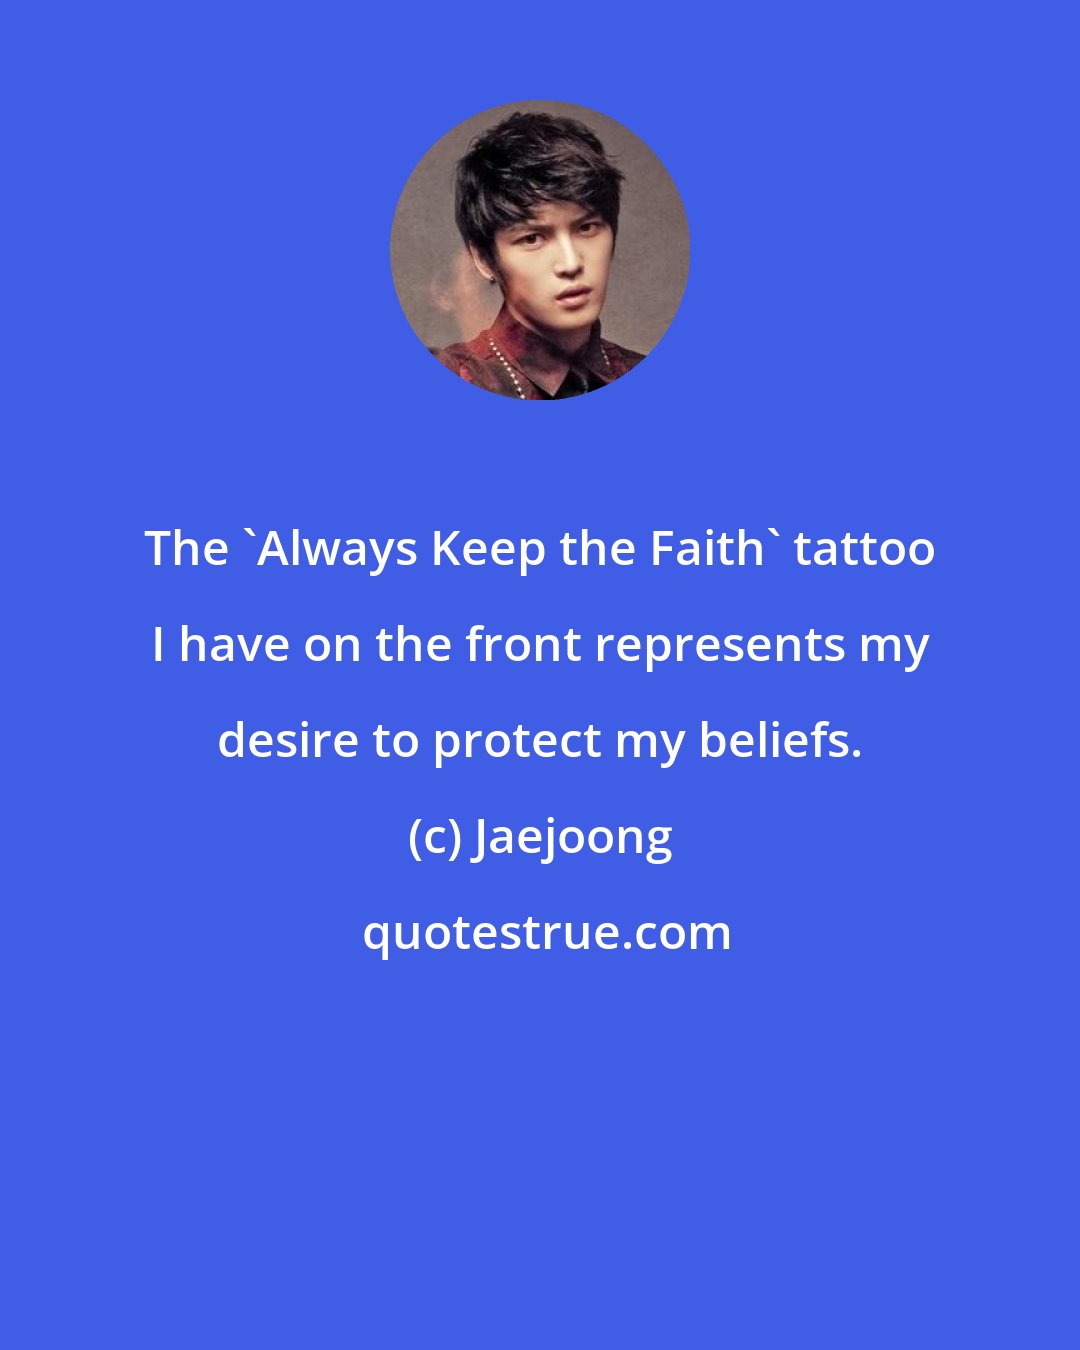 Jaejoong: The 'Always Keep the Faith' tattoo I have on the front represents my desire to protect my beliefs.